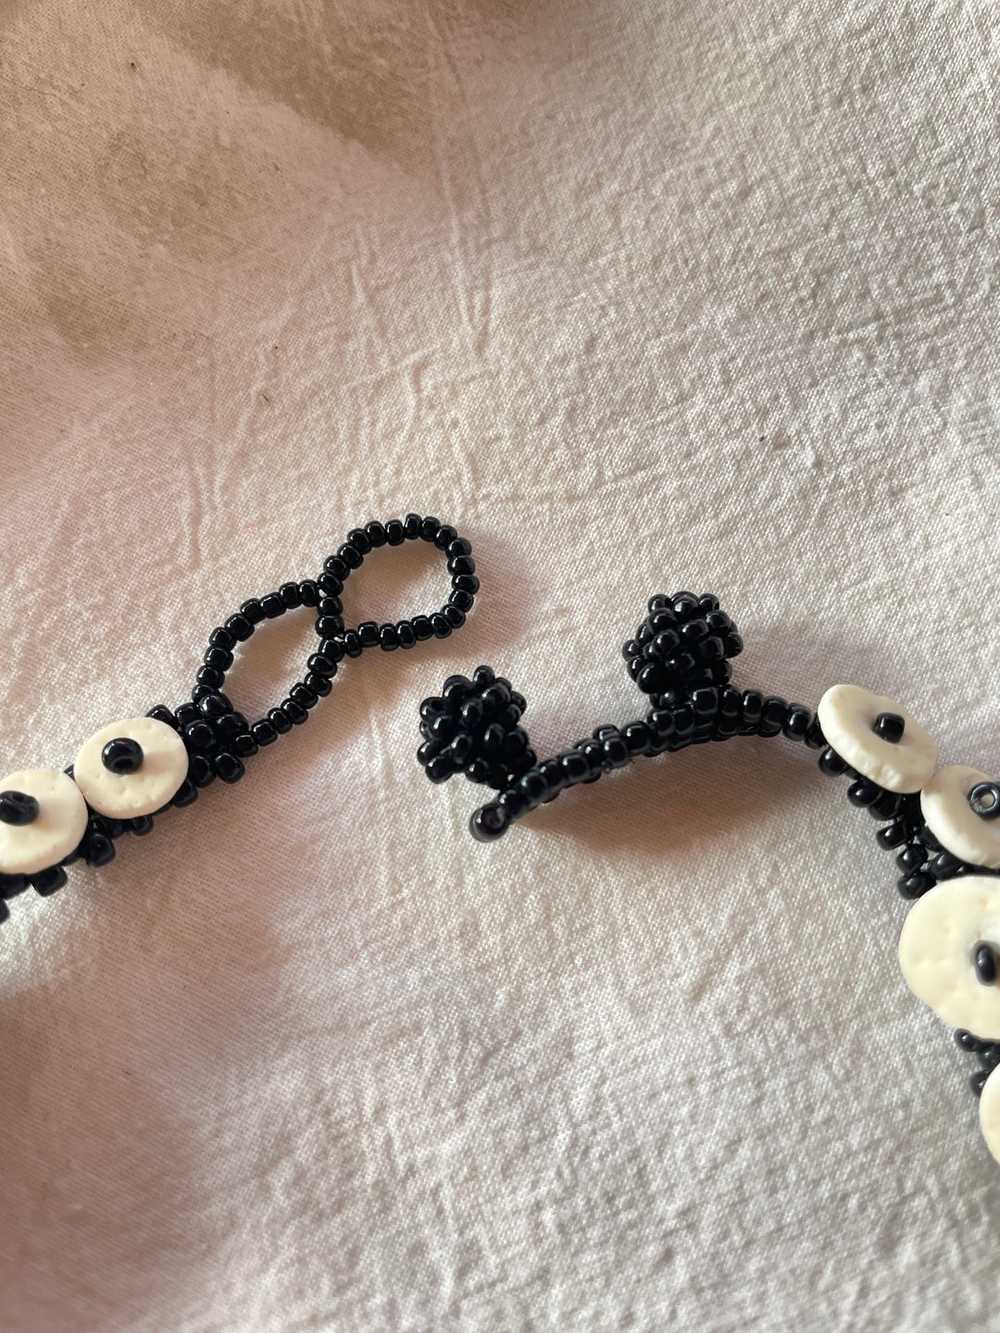 Vintage Beaded Collar with White Shells - image 3